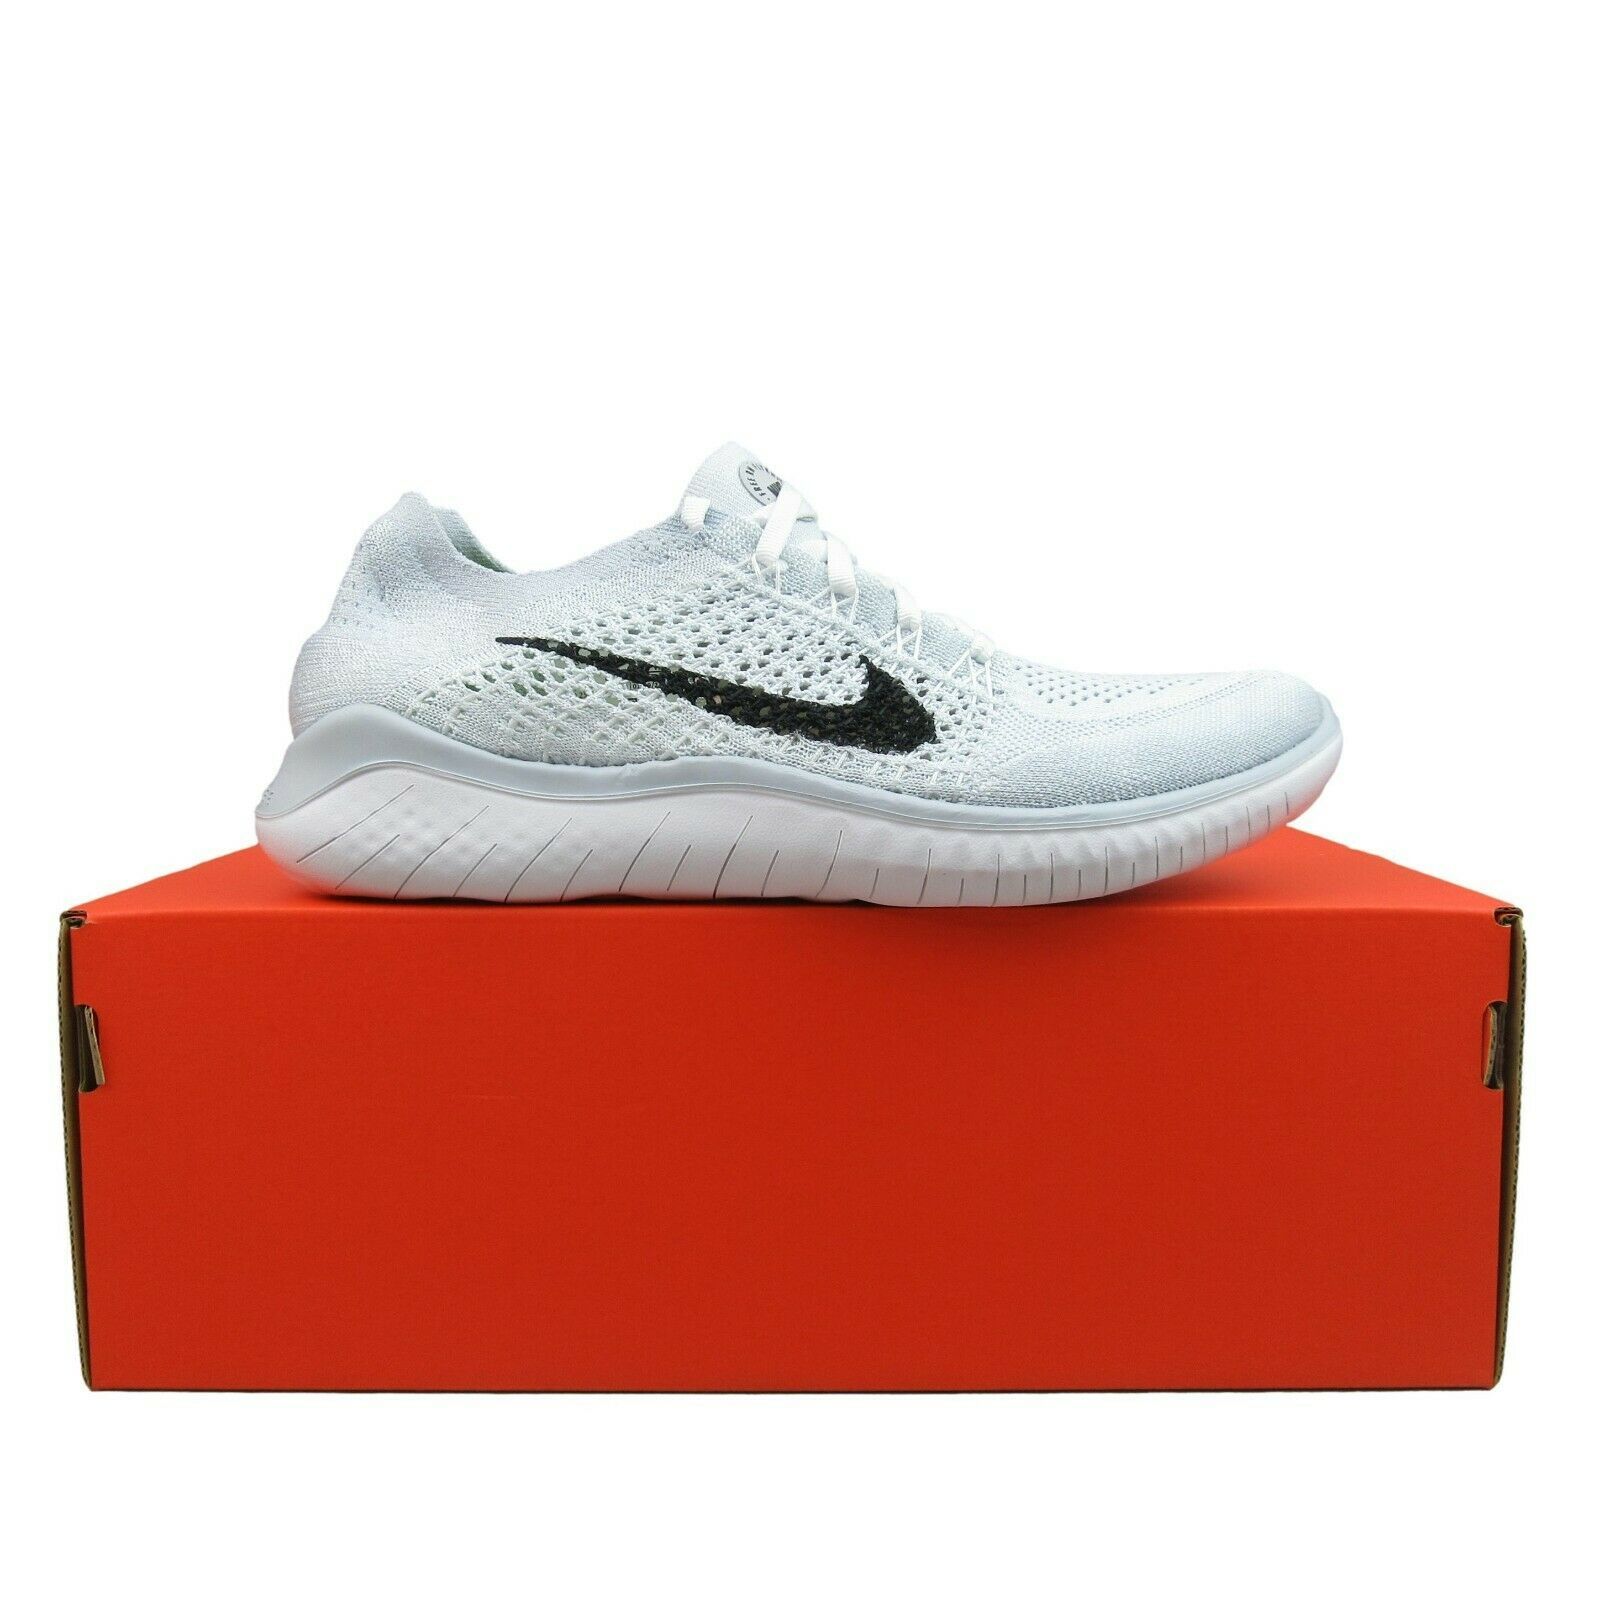 Primary image for Nike Free RN Flyknit 2018 Womens Running Shoes White NEW 942839-100 Multi Sizes